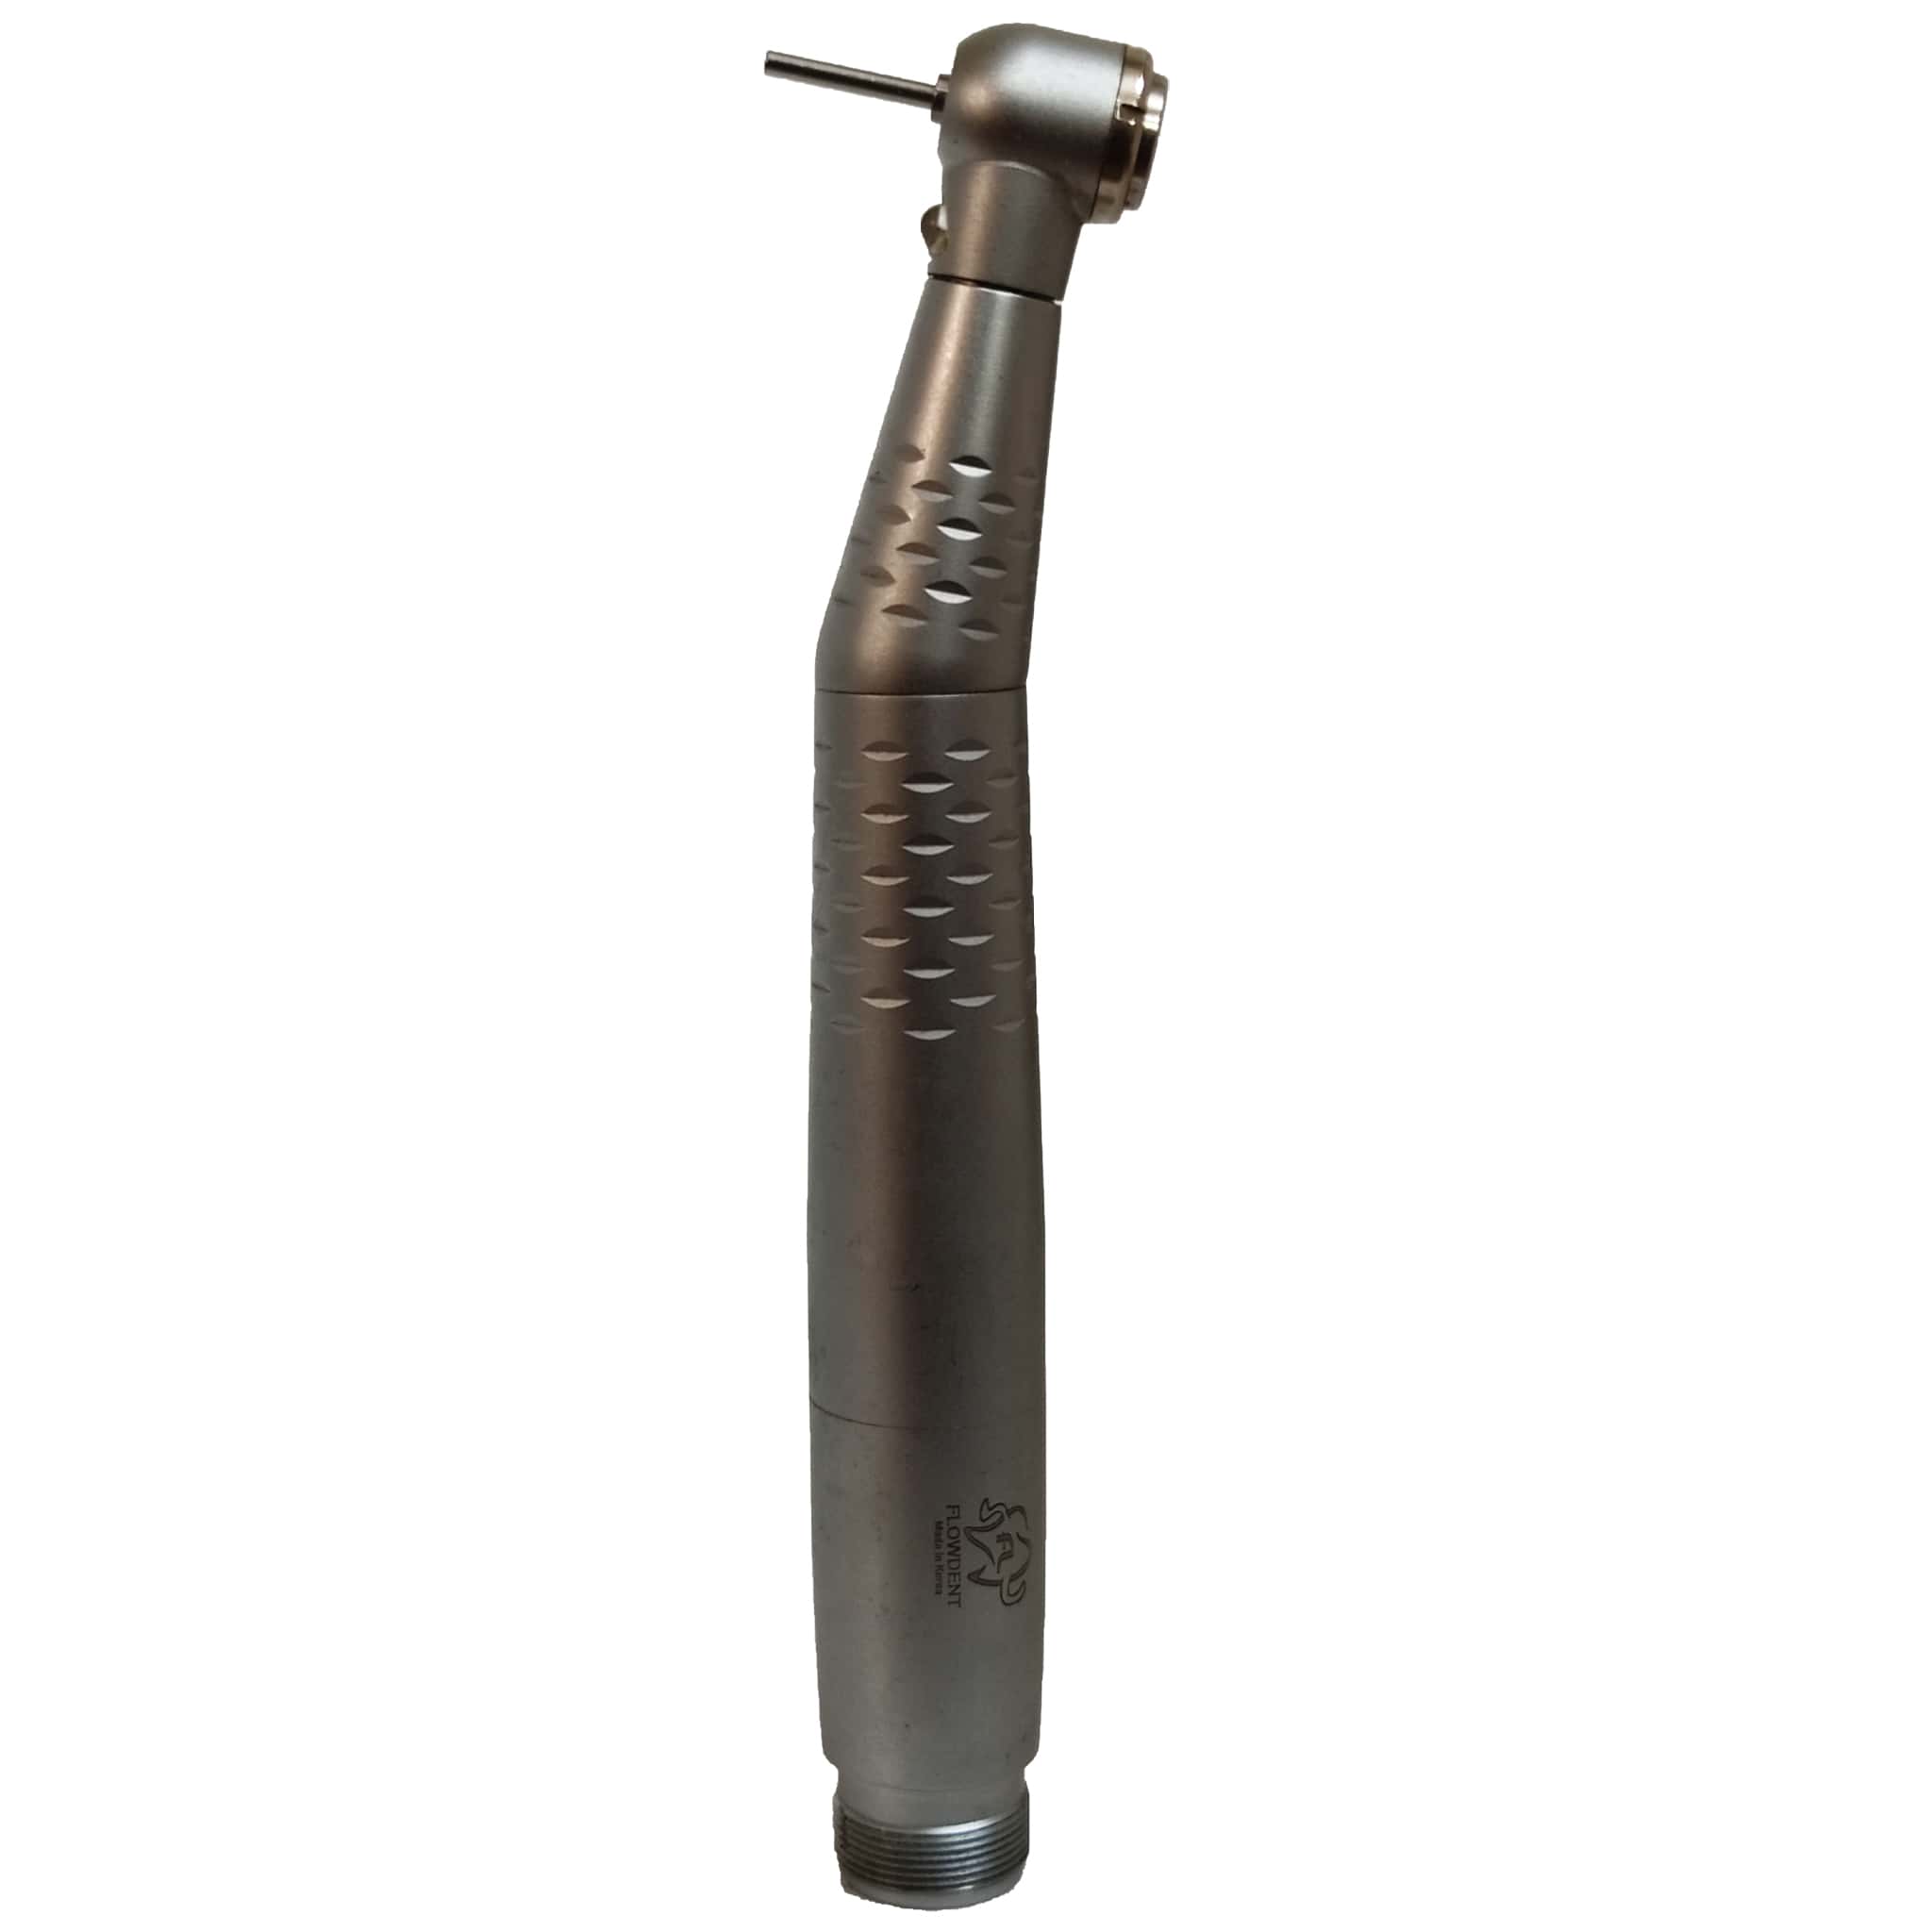 Flowdent LED Pushbutton Airotor Handpiece (No Warranty)